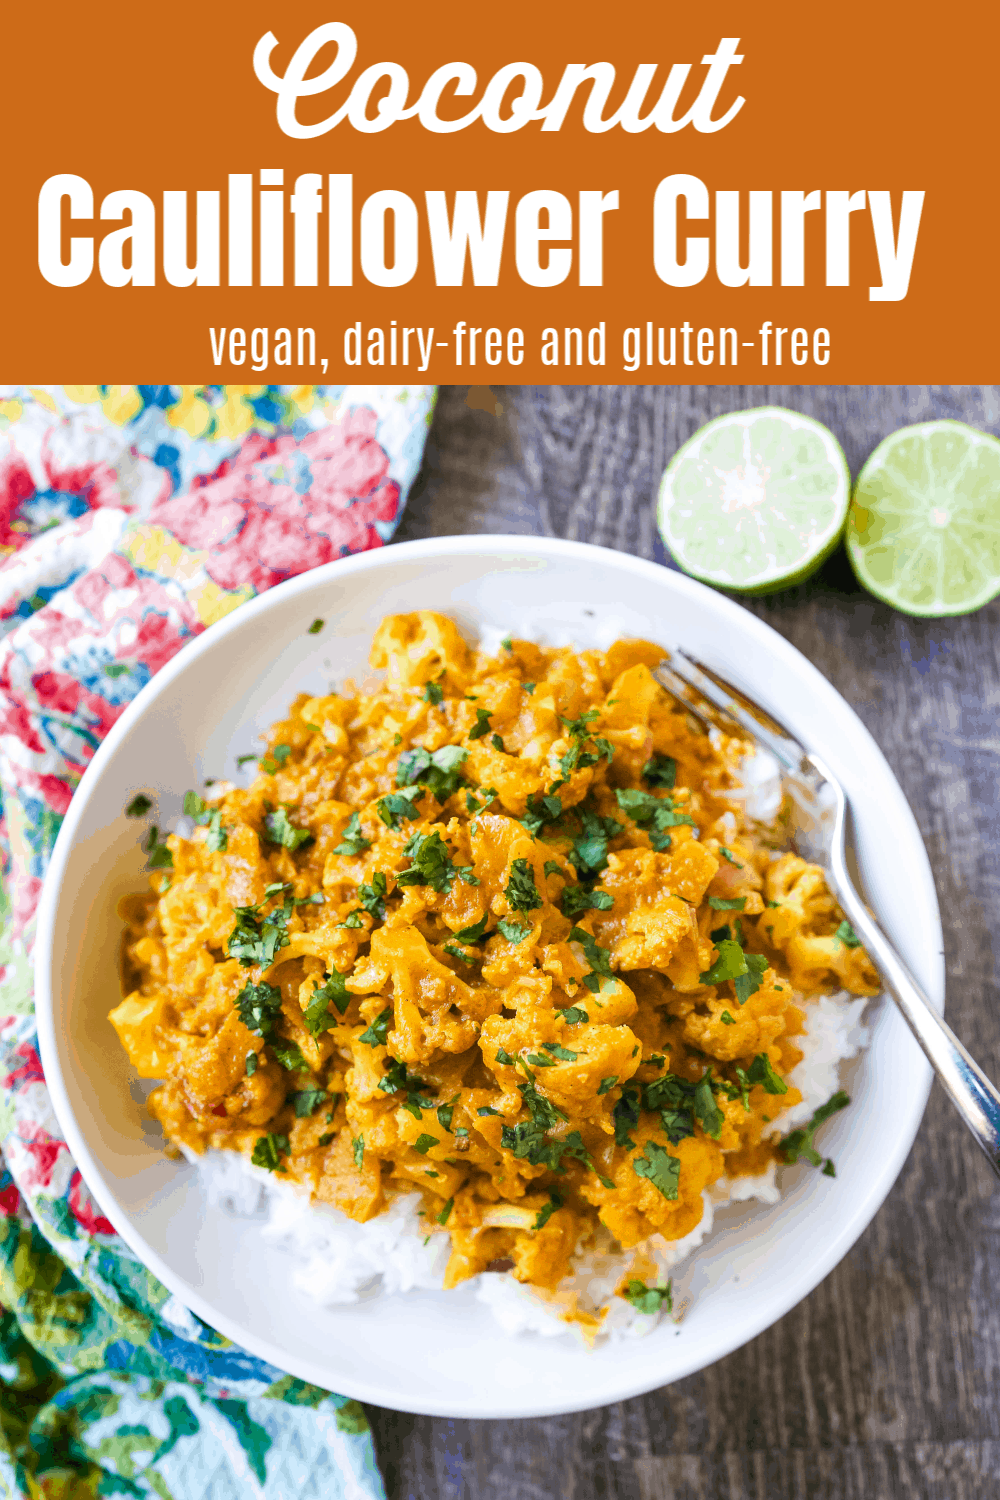 Coconut Cauliflower Curry A rich coconut curry broth with onion, garlic, cauliflower, ginger, Indian spices in coconut milk. Flavorful vegan meal and you won’t even miss the meat! www.modernhoney.com #curry #cauliflower #cauliflowercurry #indianfood 